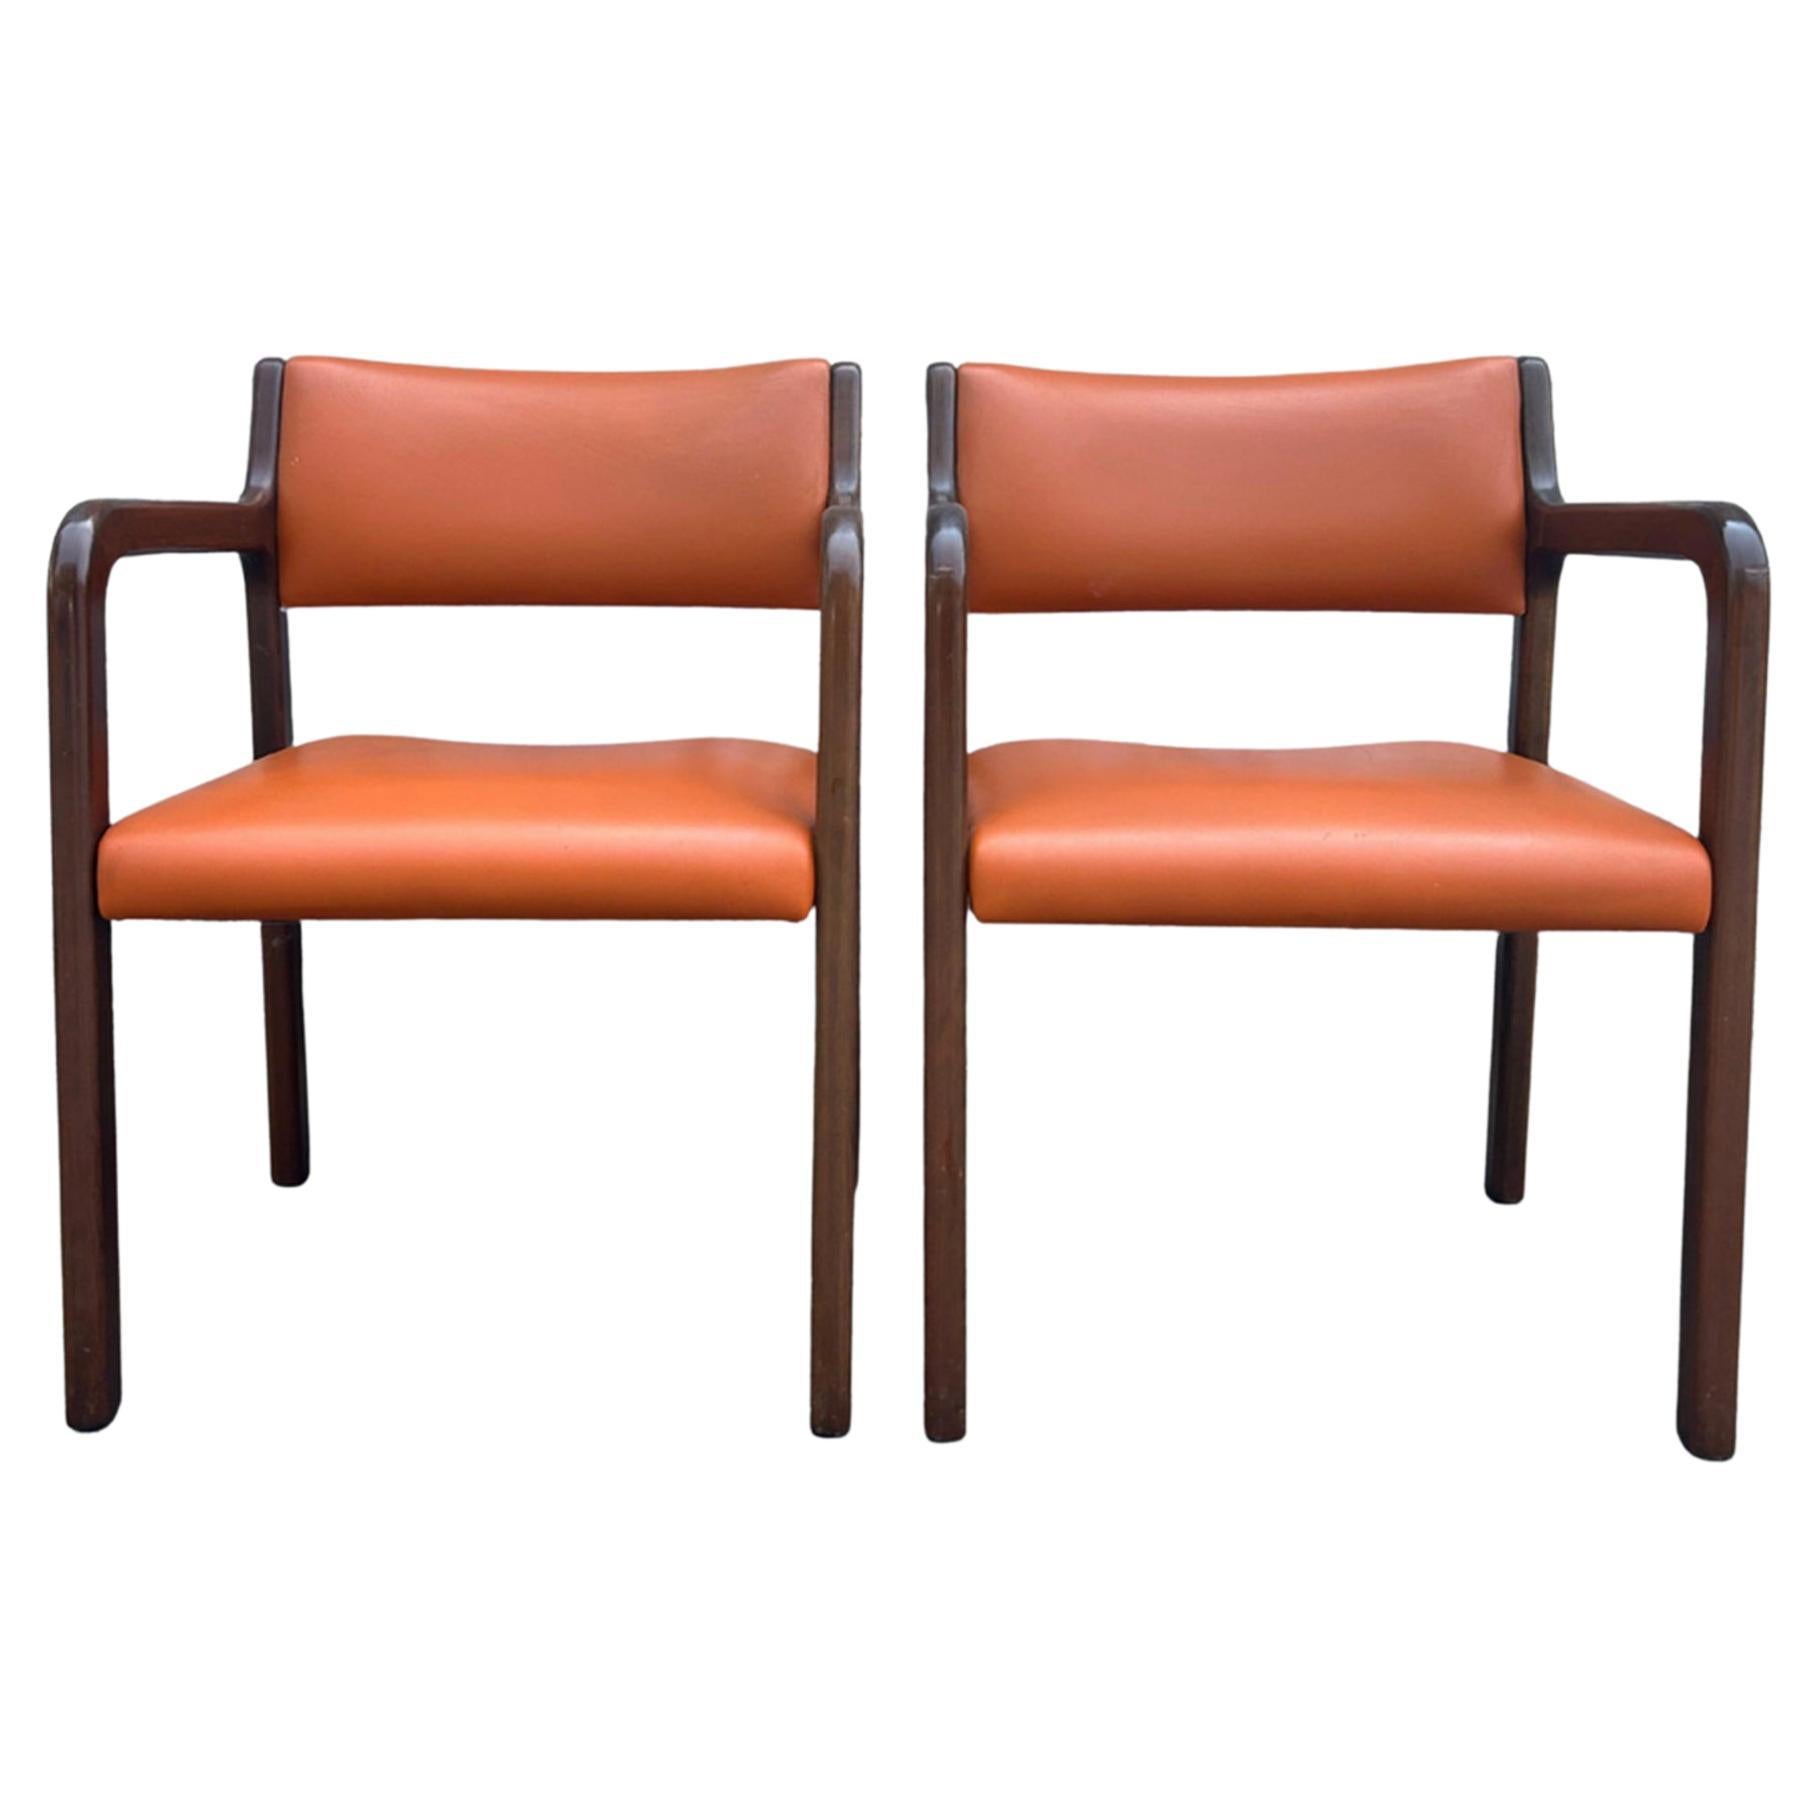 Pair of Mid-Century Modern Rounded Walnut arm chairs with Orange Upholstery. Very Nice Pair of curved rounded arm chairs. Orange Vinyl Upholstery. Very clean chairs. Made in USA Located in Brooklyn NYC.

 